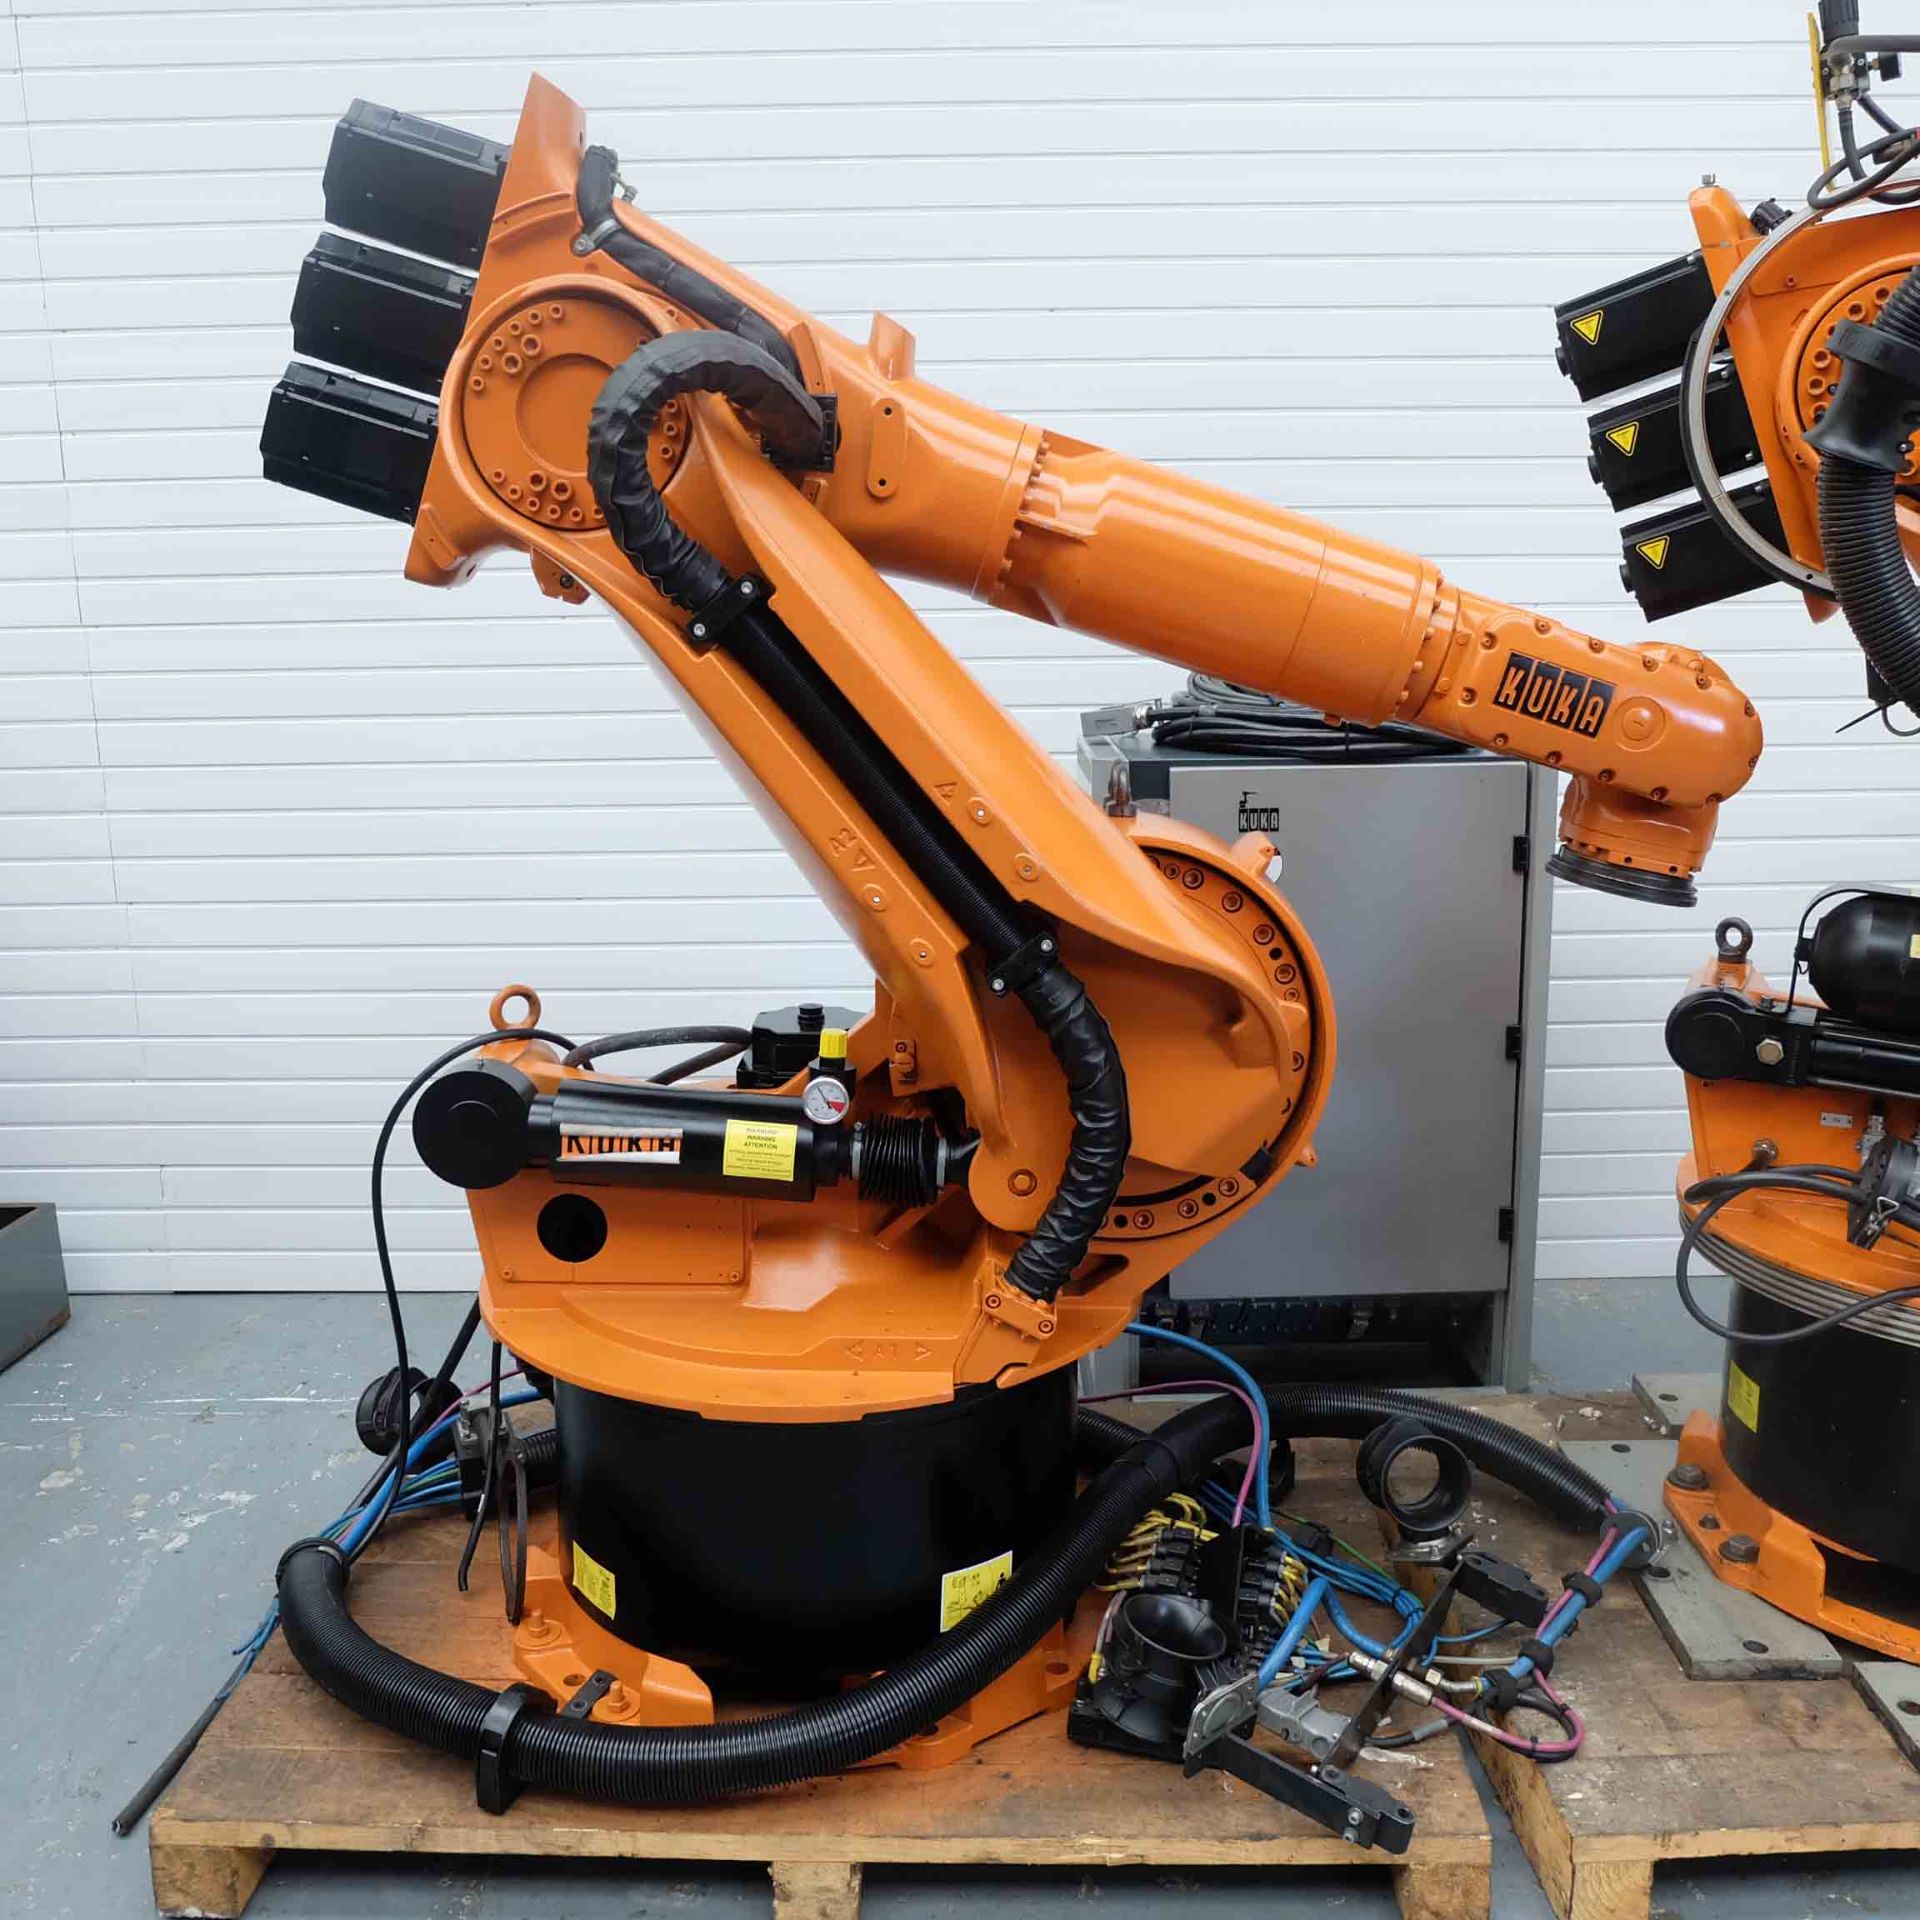 2 x Kuka Type KR125 6 Axis Robotic Arms. (1 Complete & 1 Incomplete). - Image 13 of 35